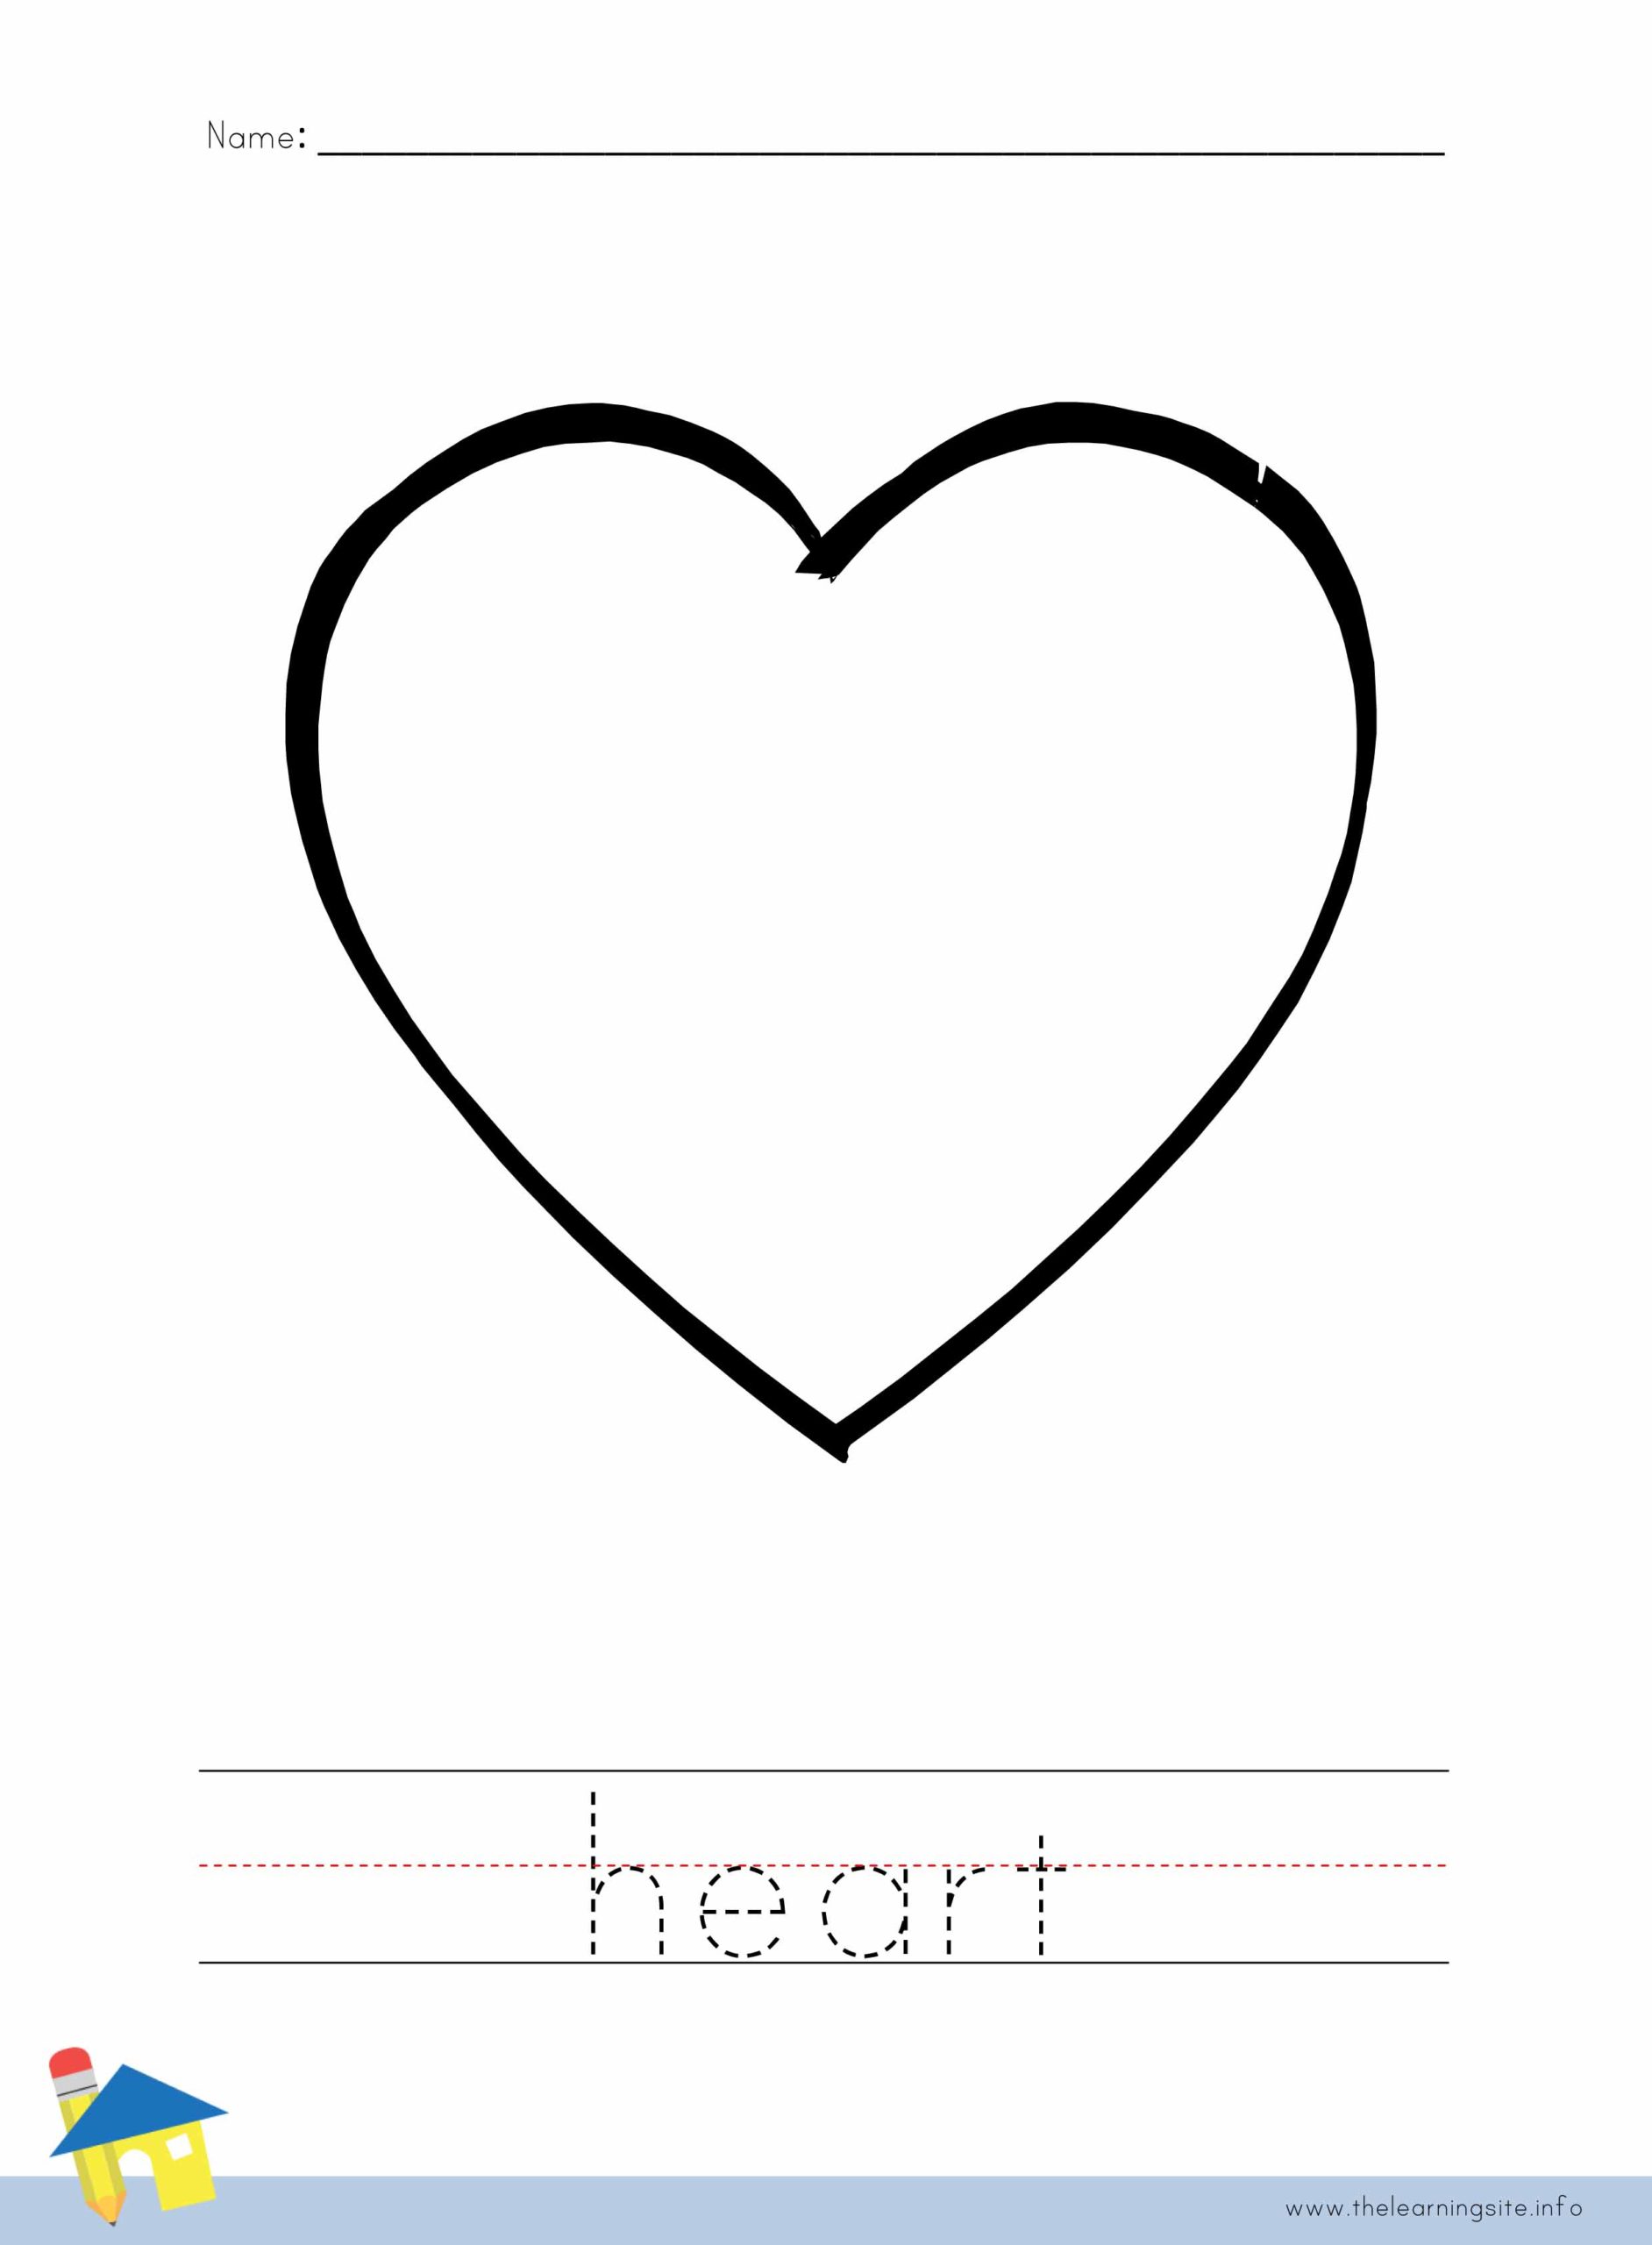 heart-coloring-worksheet-the-learning-site